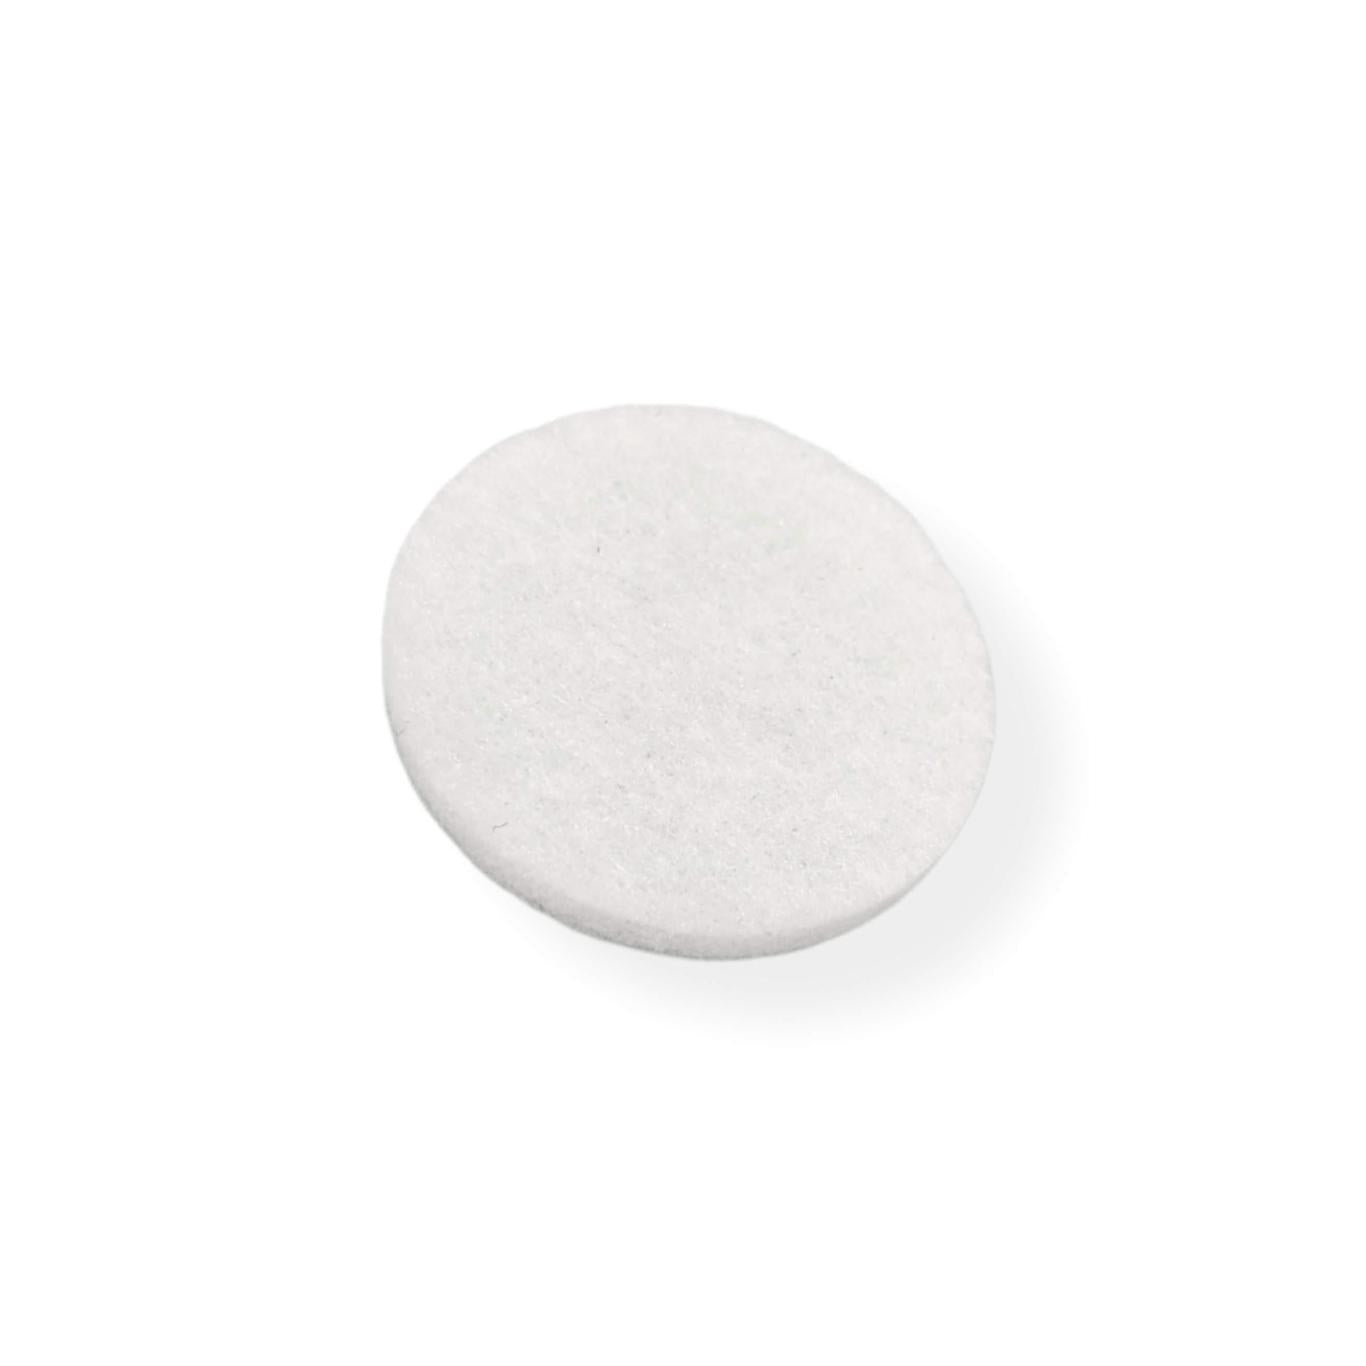 Felt Pads - White Self Adhesive Stick on Felt - Round 35mm Diameter - Made in Germany - Keay Vital Parts